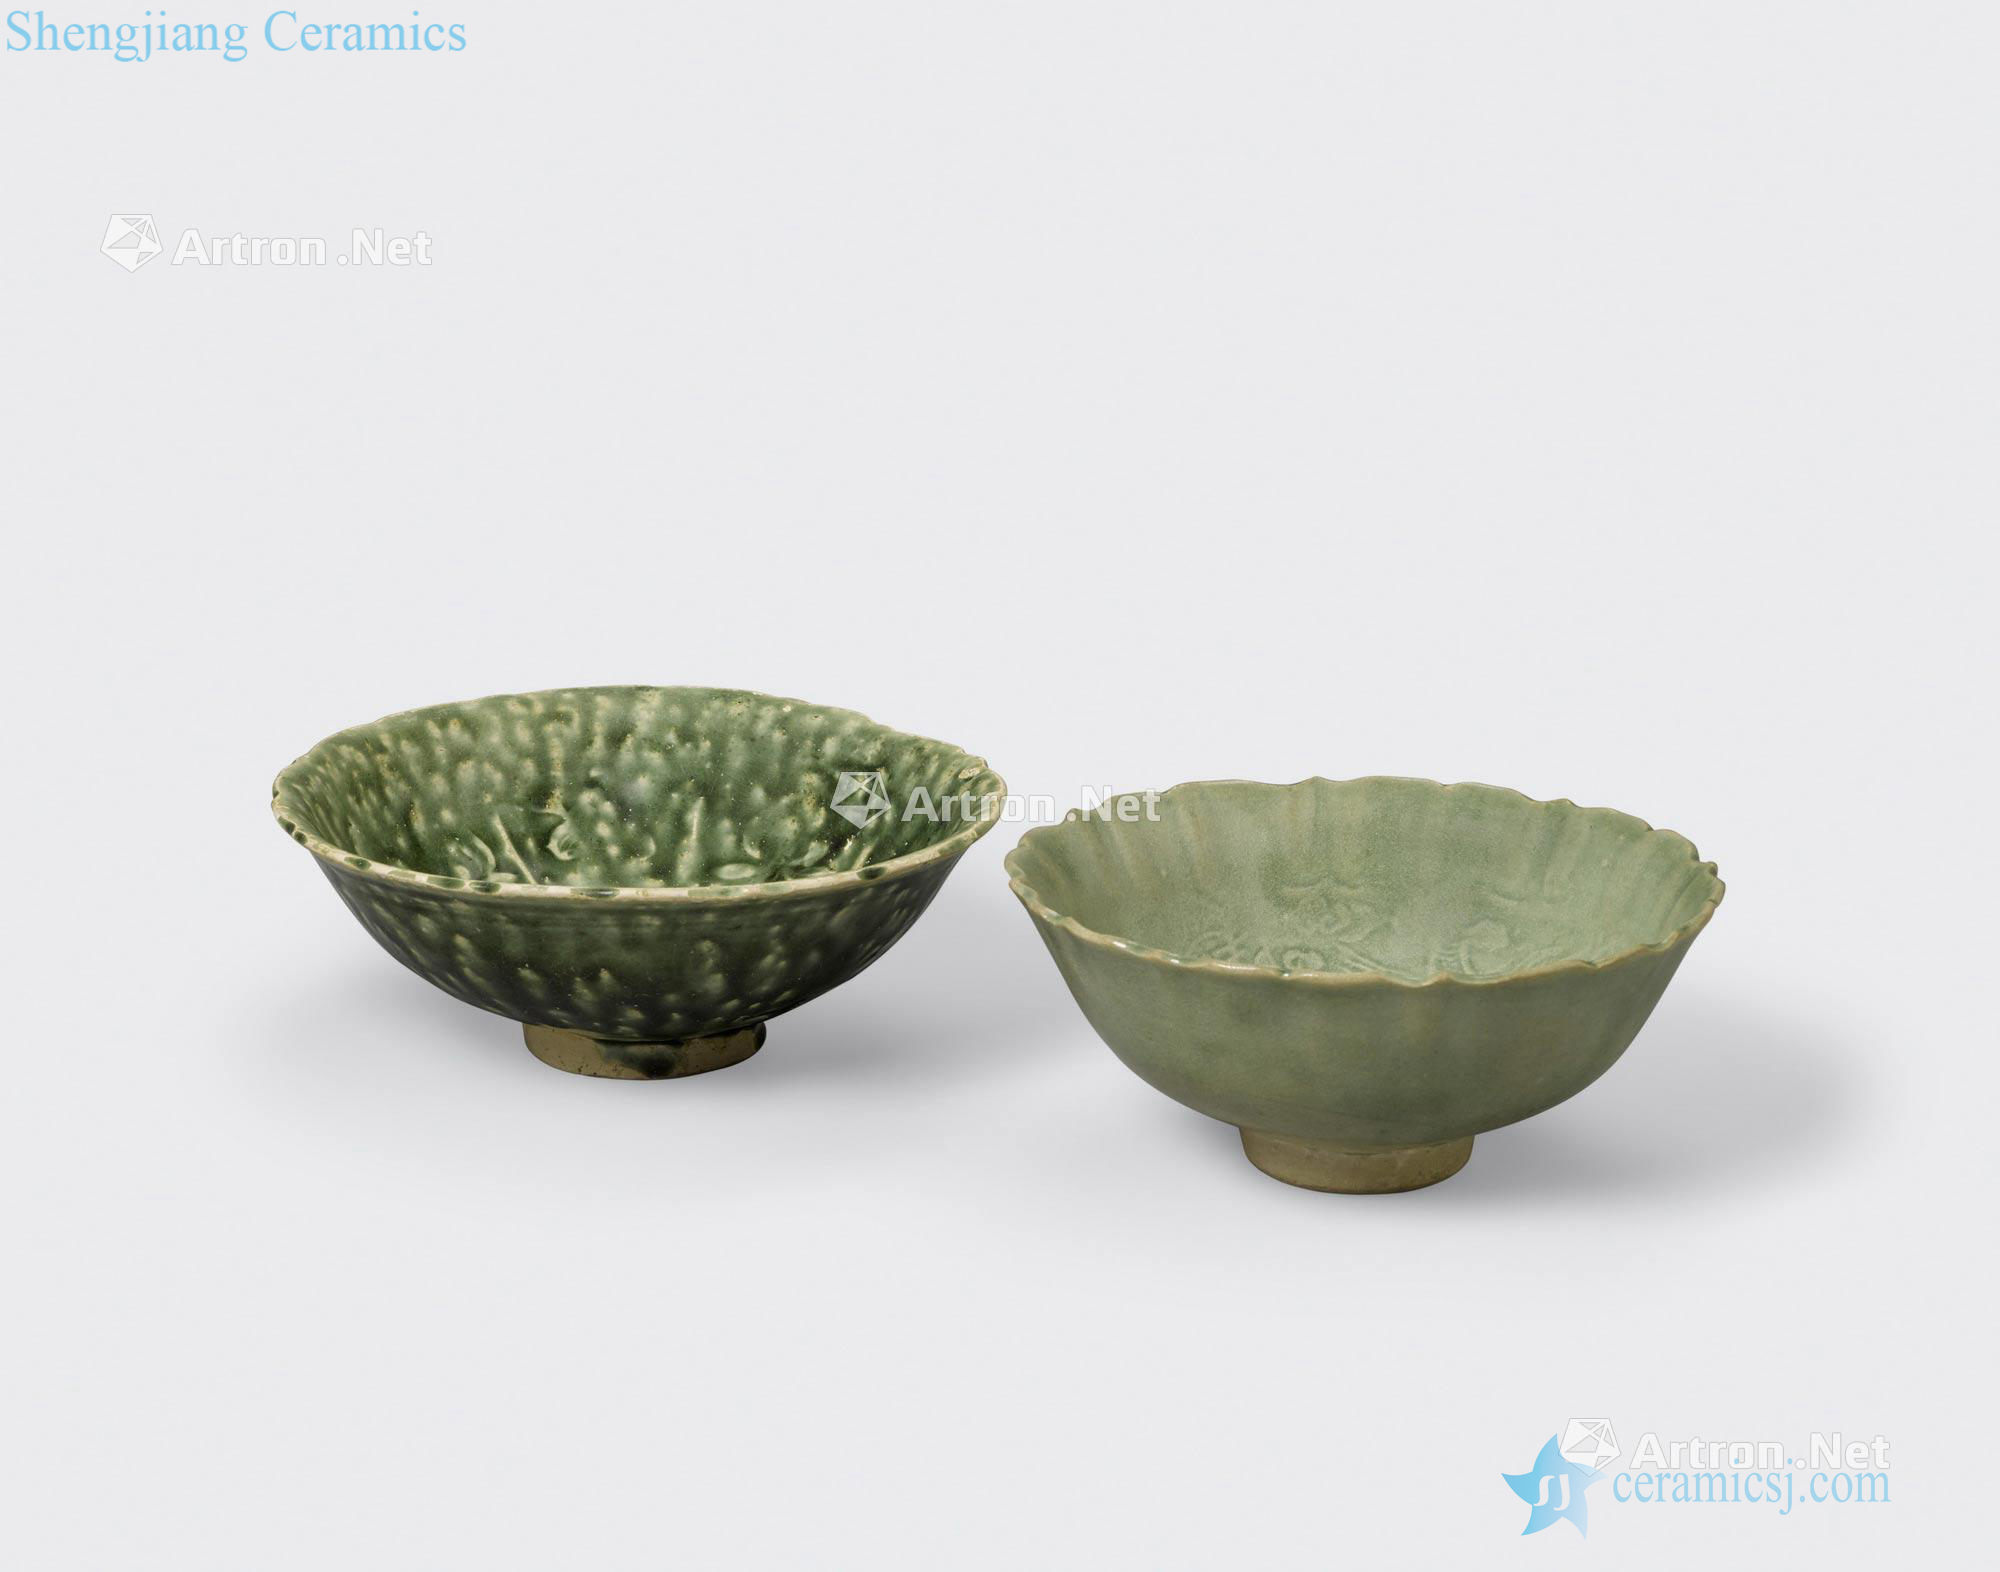 Tran - Le dynasties, 14 th/15 th century TWO GREEN GLAZED BOWLS WITH UNGLAZED STACKING RINGS